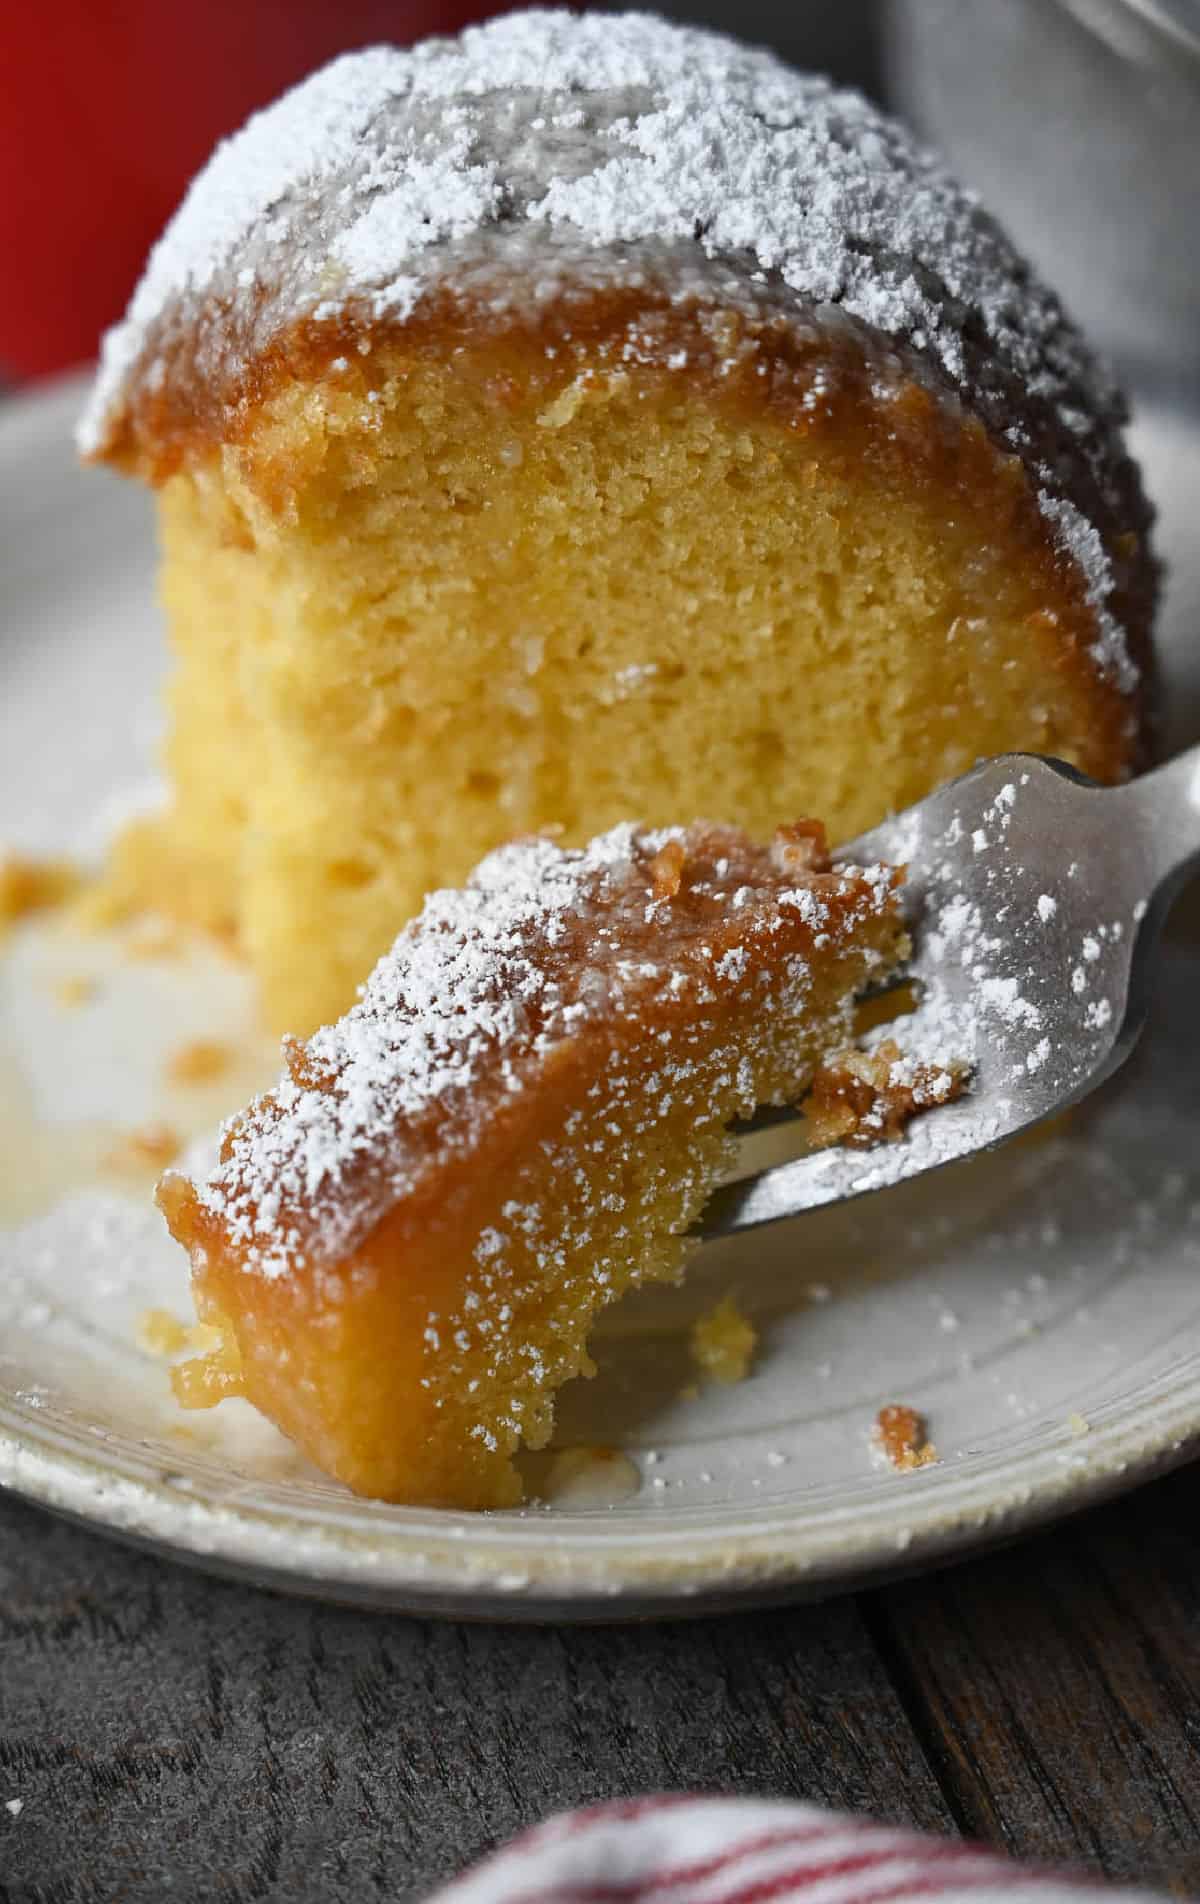 A piece of rum cake on a plate with a bit taken off.